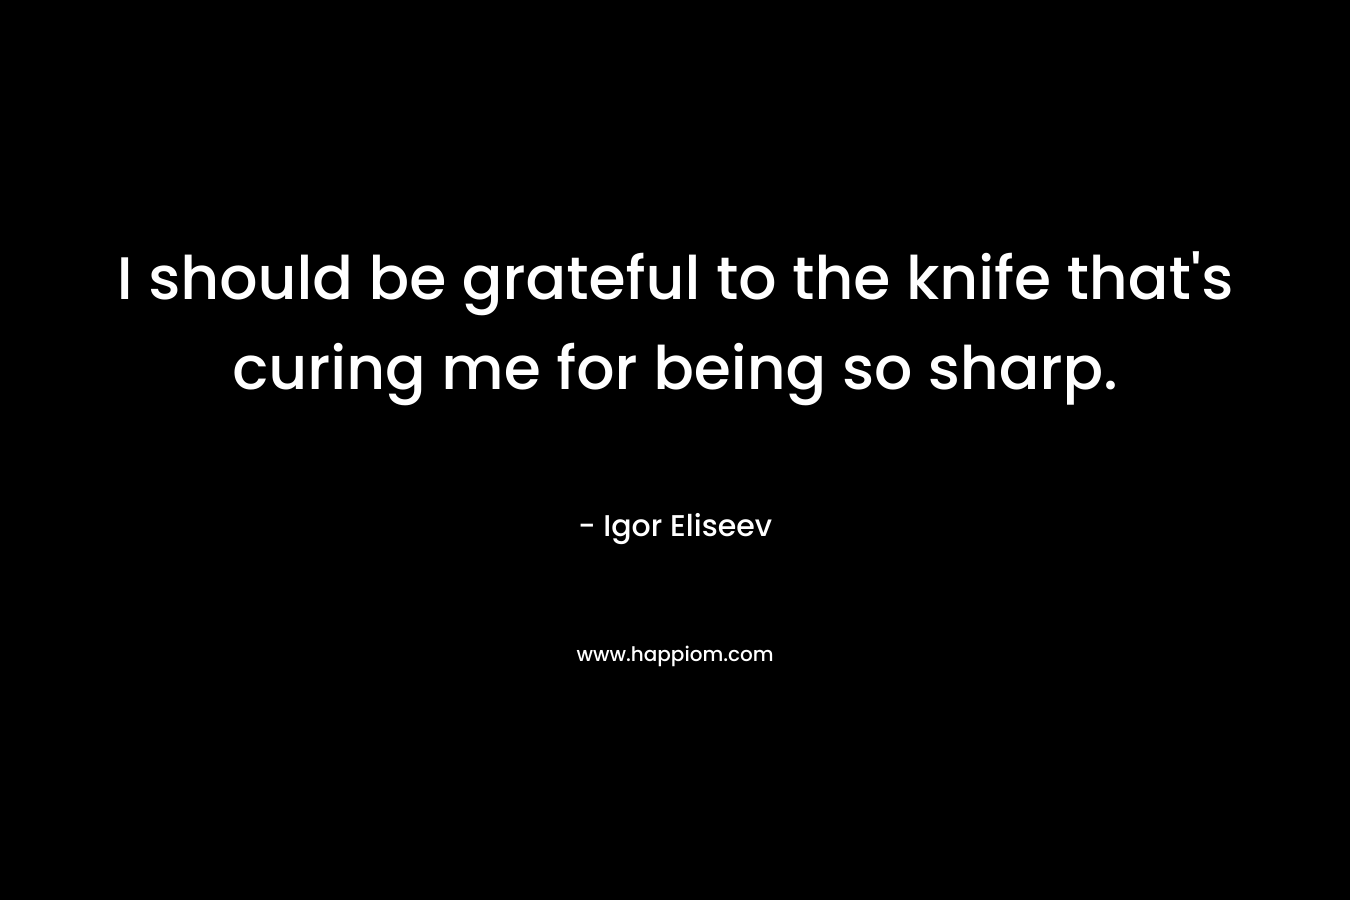 I should be grateful to the knife that’s curing me for being so sharp. – Igor Eliseev